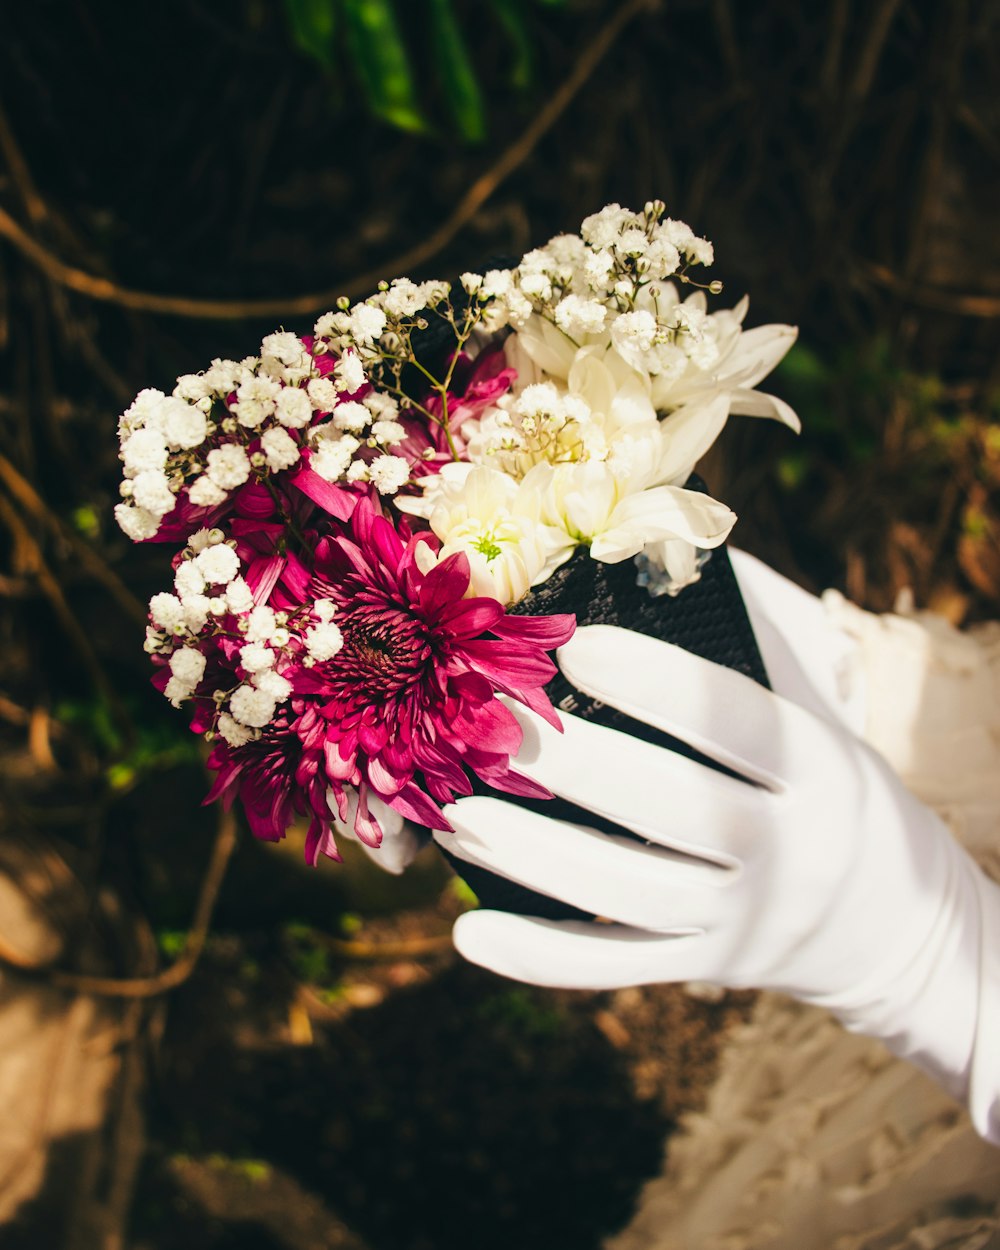 a white glove holding a bouquet of flowers